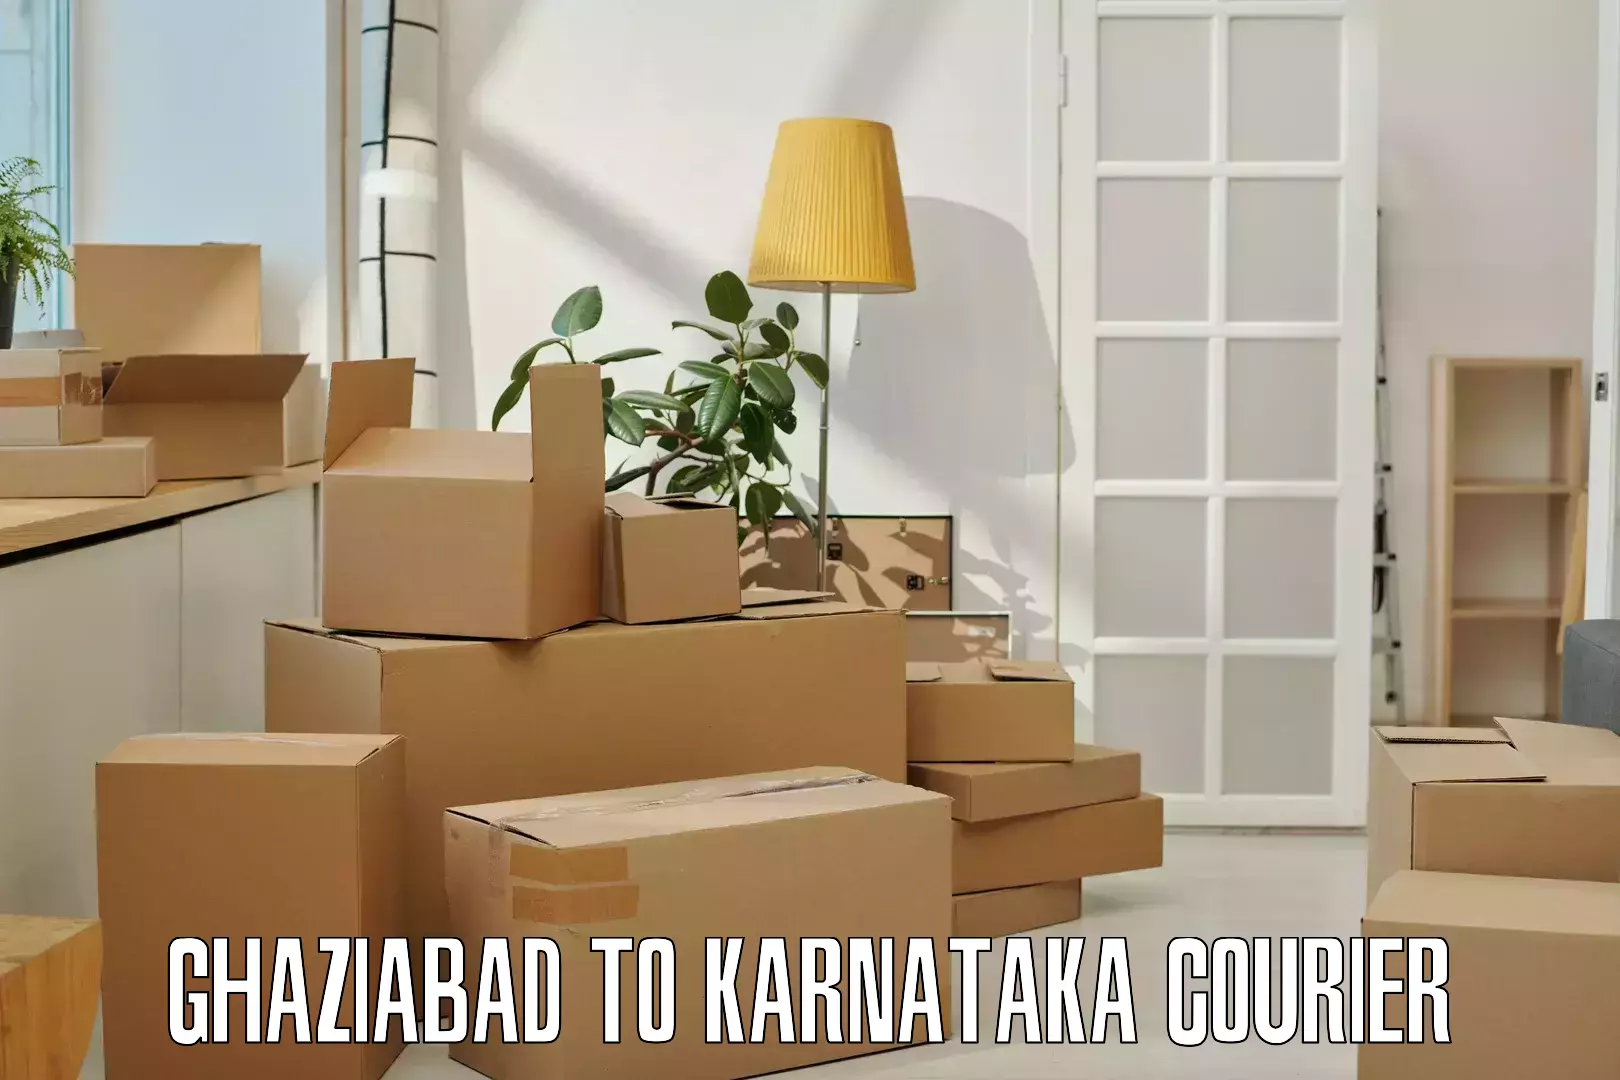 Nationwide shipping coverage in Ghaziabad to Mysore